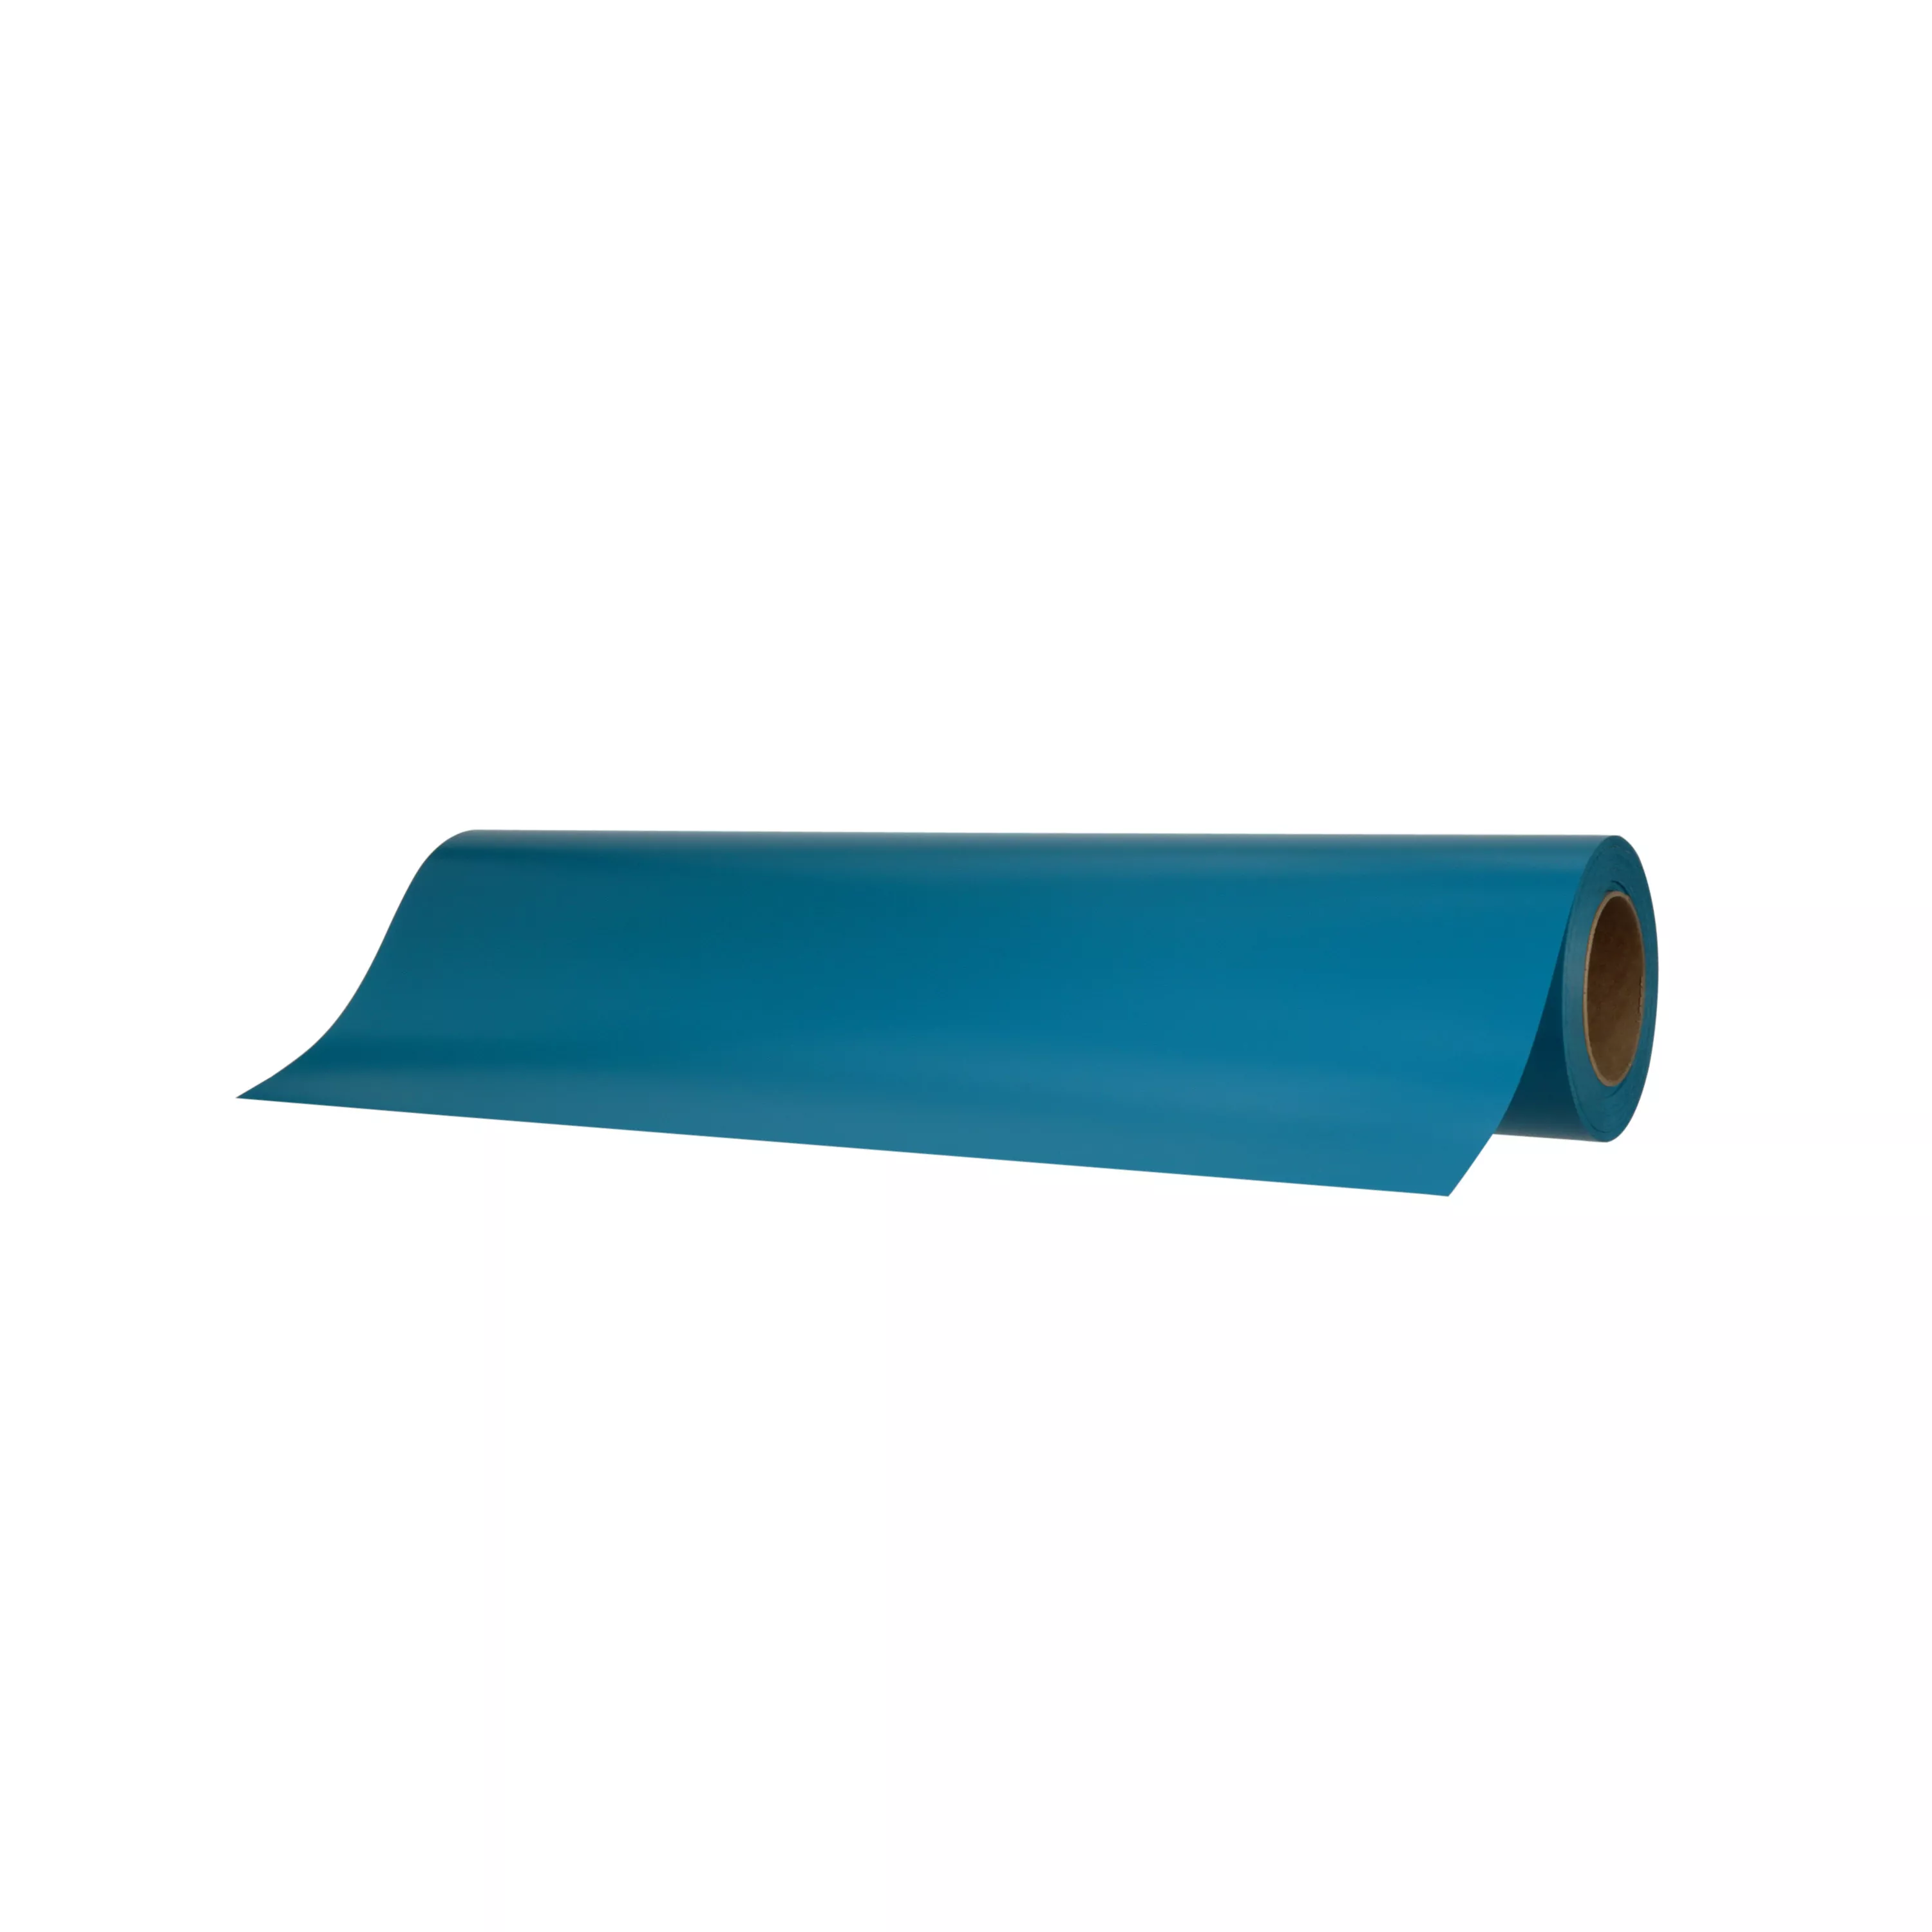 3M™ Scotchcal™ Translucent Graphic Film 3630-216, Blue Coral, 48 in x 50
yd, 1 Roll/Case